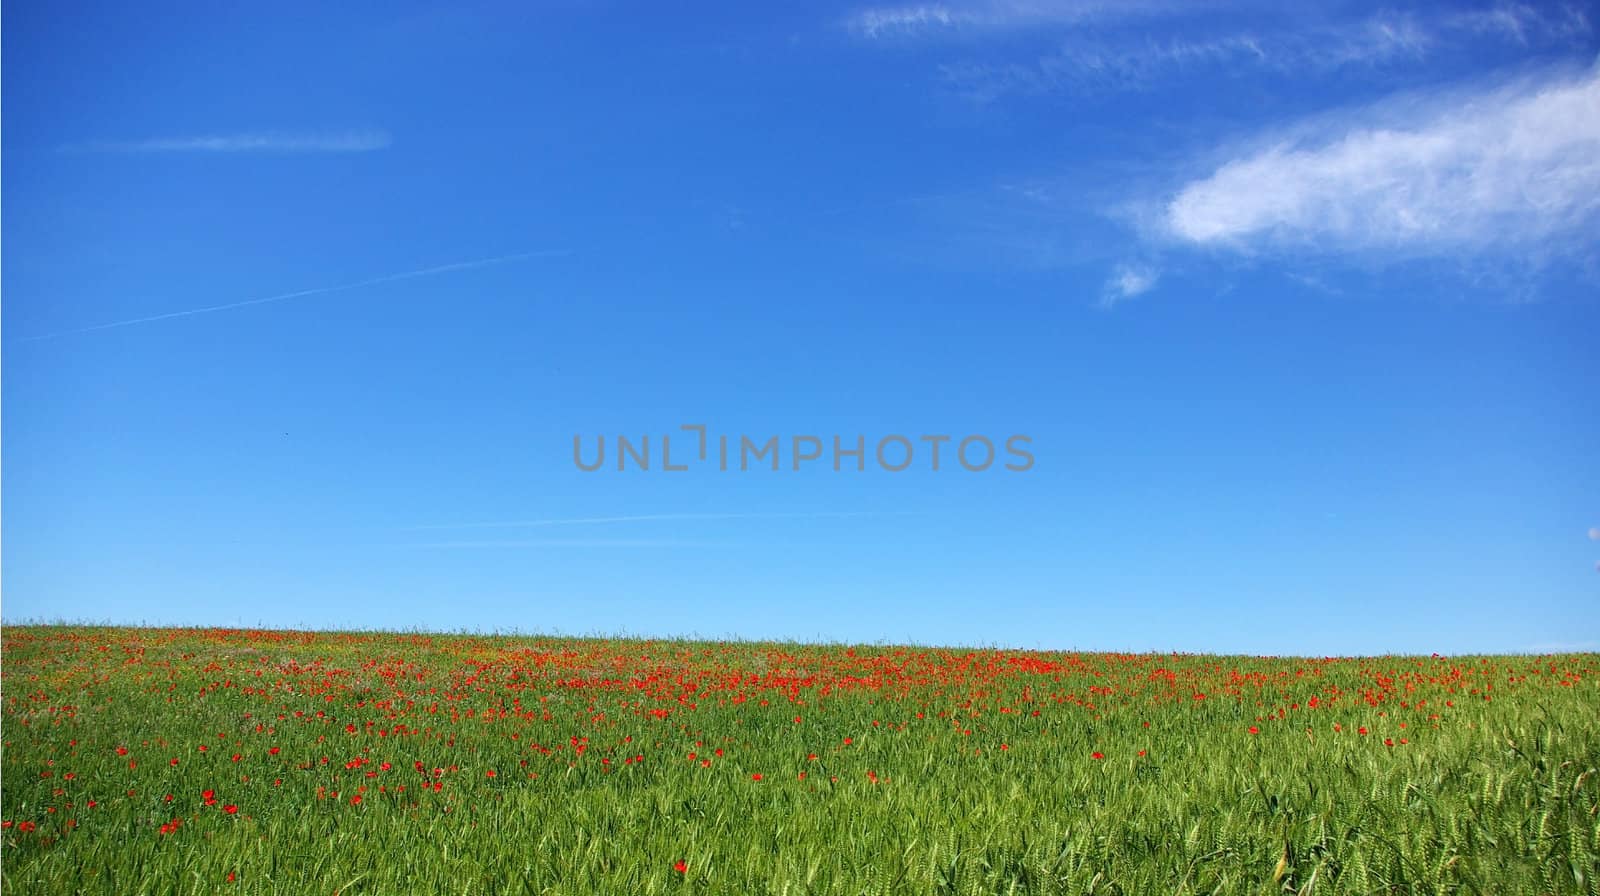 Poppies  in colored field.